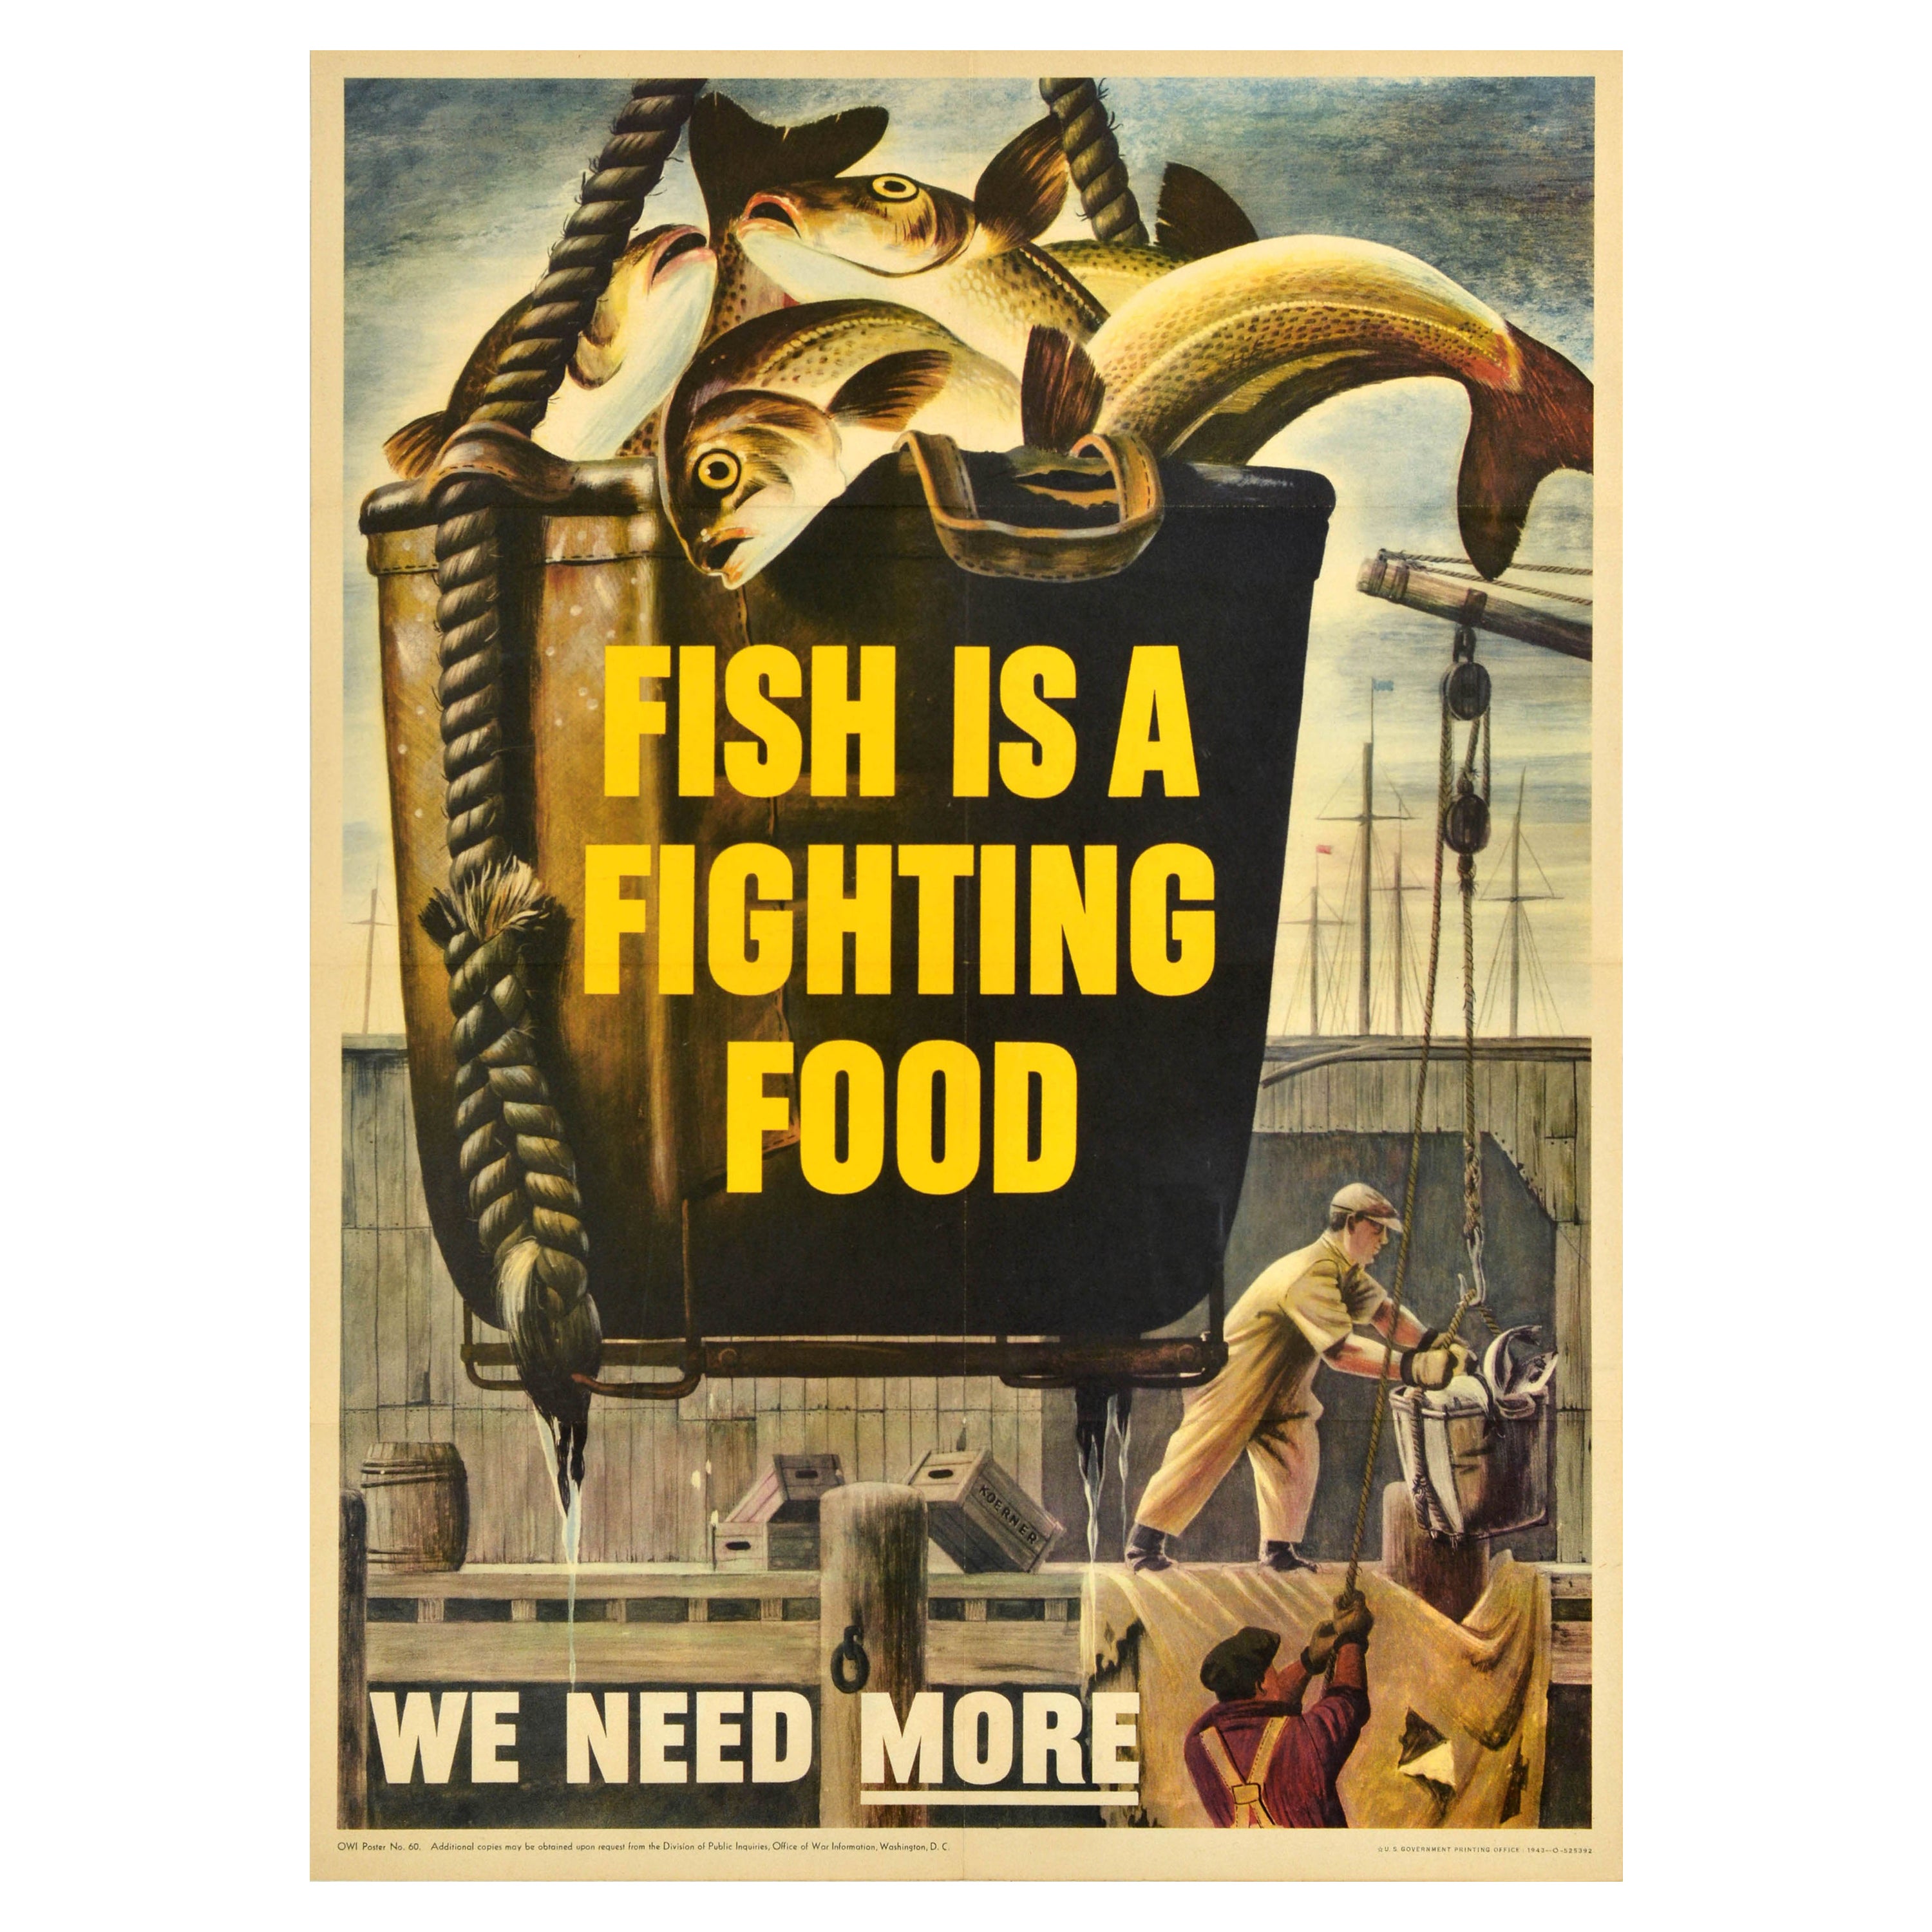 Original Vintage War Home Front Poster Fish Is A Fighting Food Rationing WWII For Sale